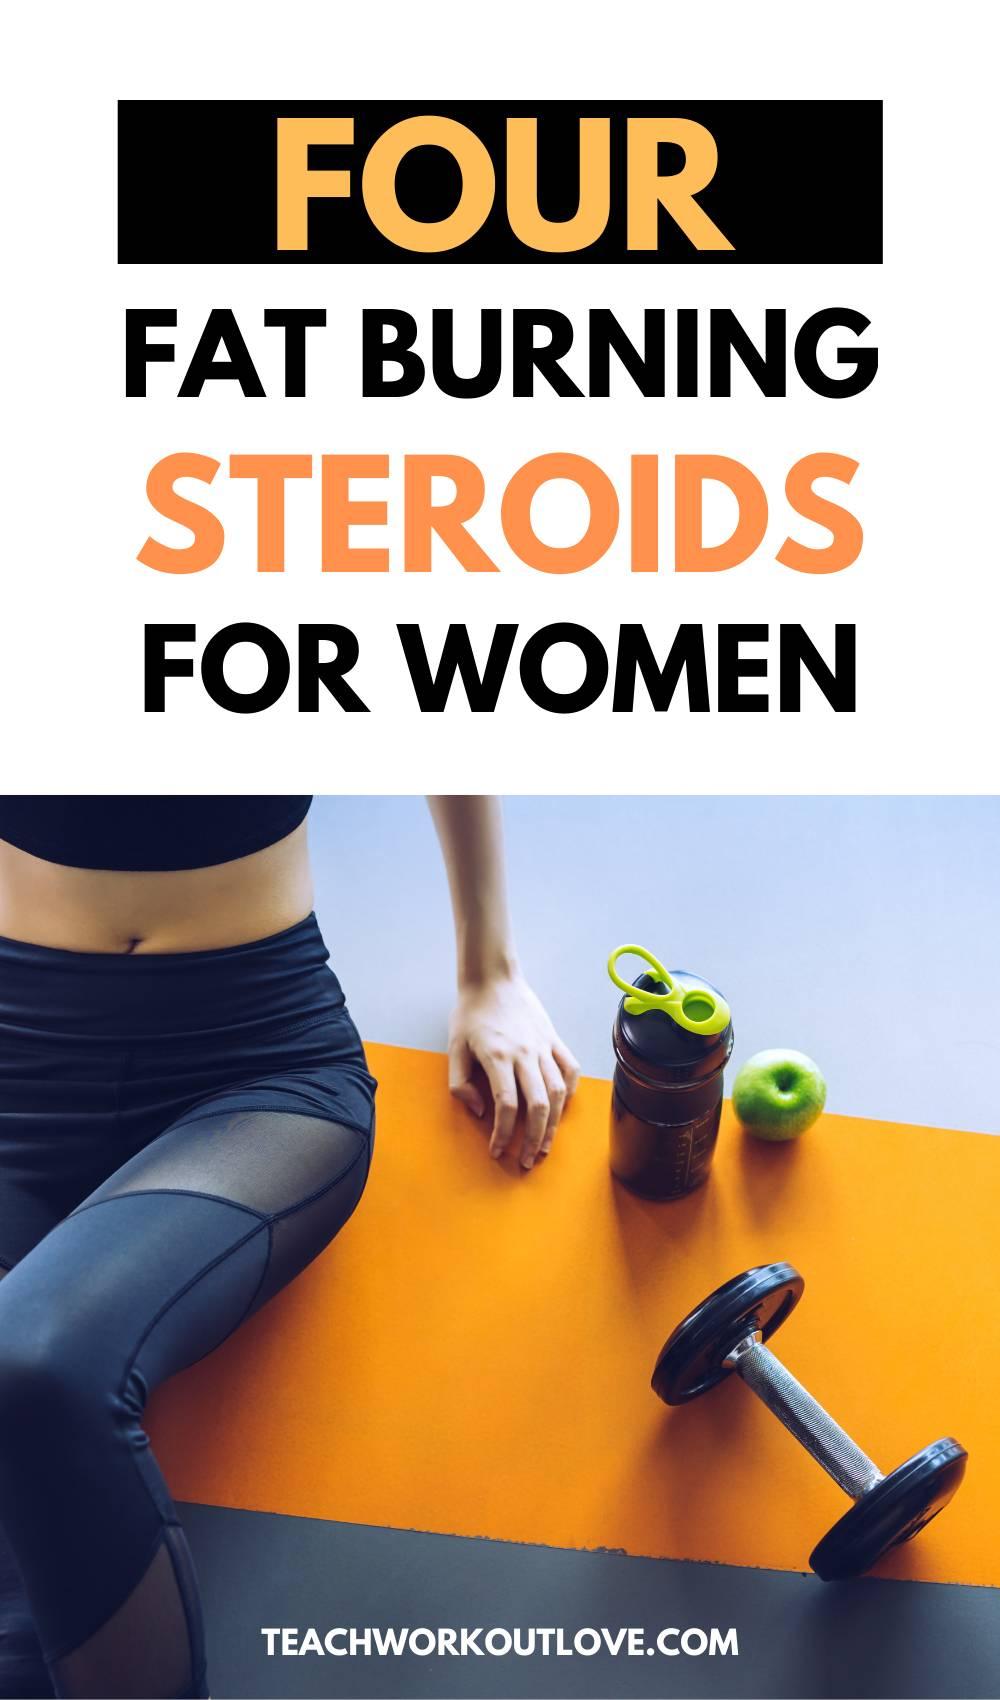 It is a common belief that only men should use steroids, but that is also a misconception. Here is how women can benefit from fat burning steroids. 